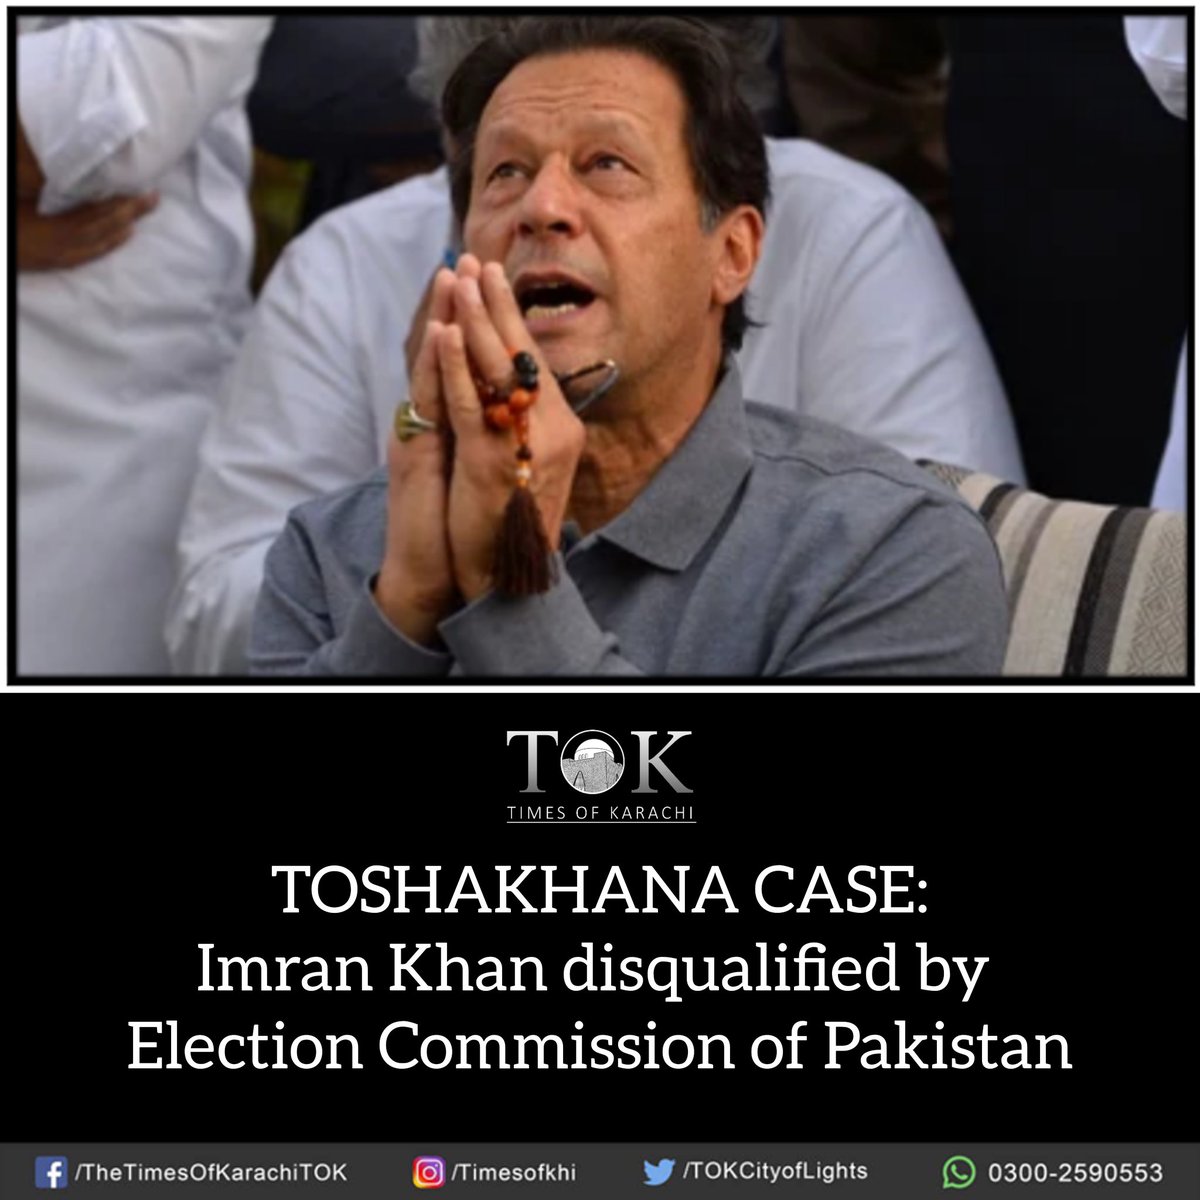 BIG NEWS: Election Commission of #Pakistan disqualified former PM #ImranKhan, declared him involved in corrupt practices. #Toshakhana #ECP